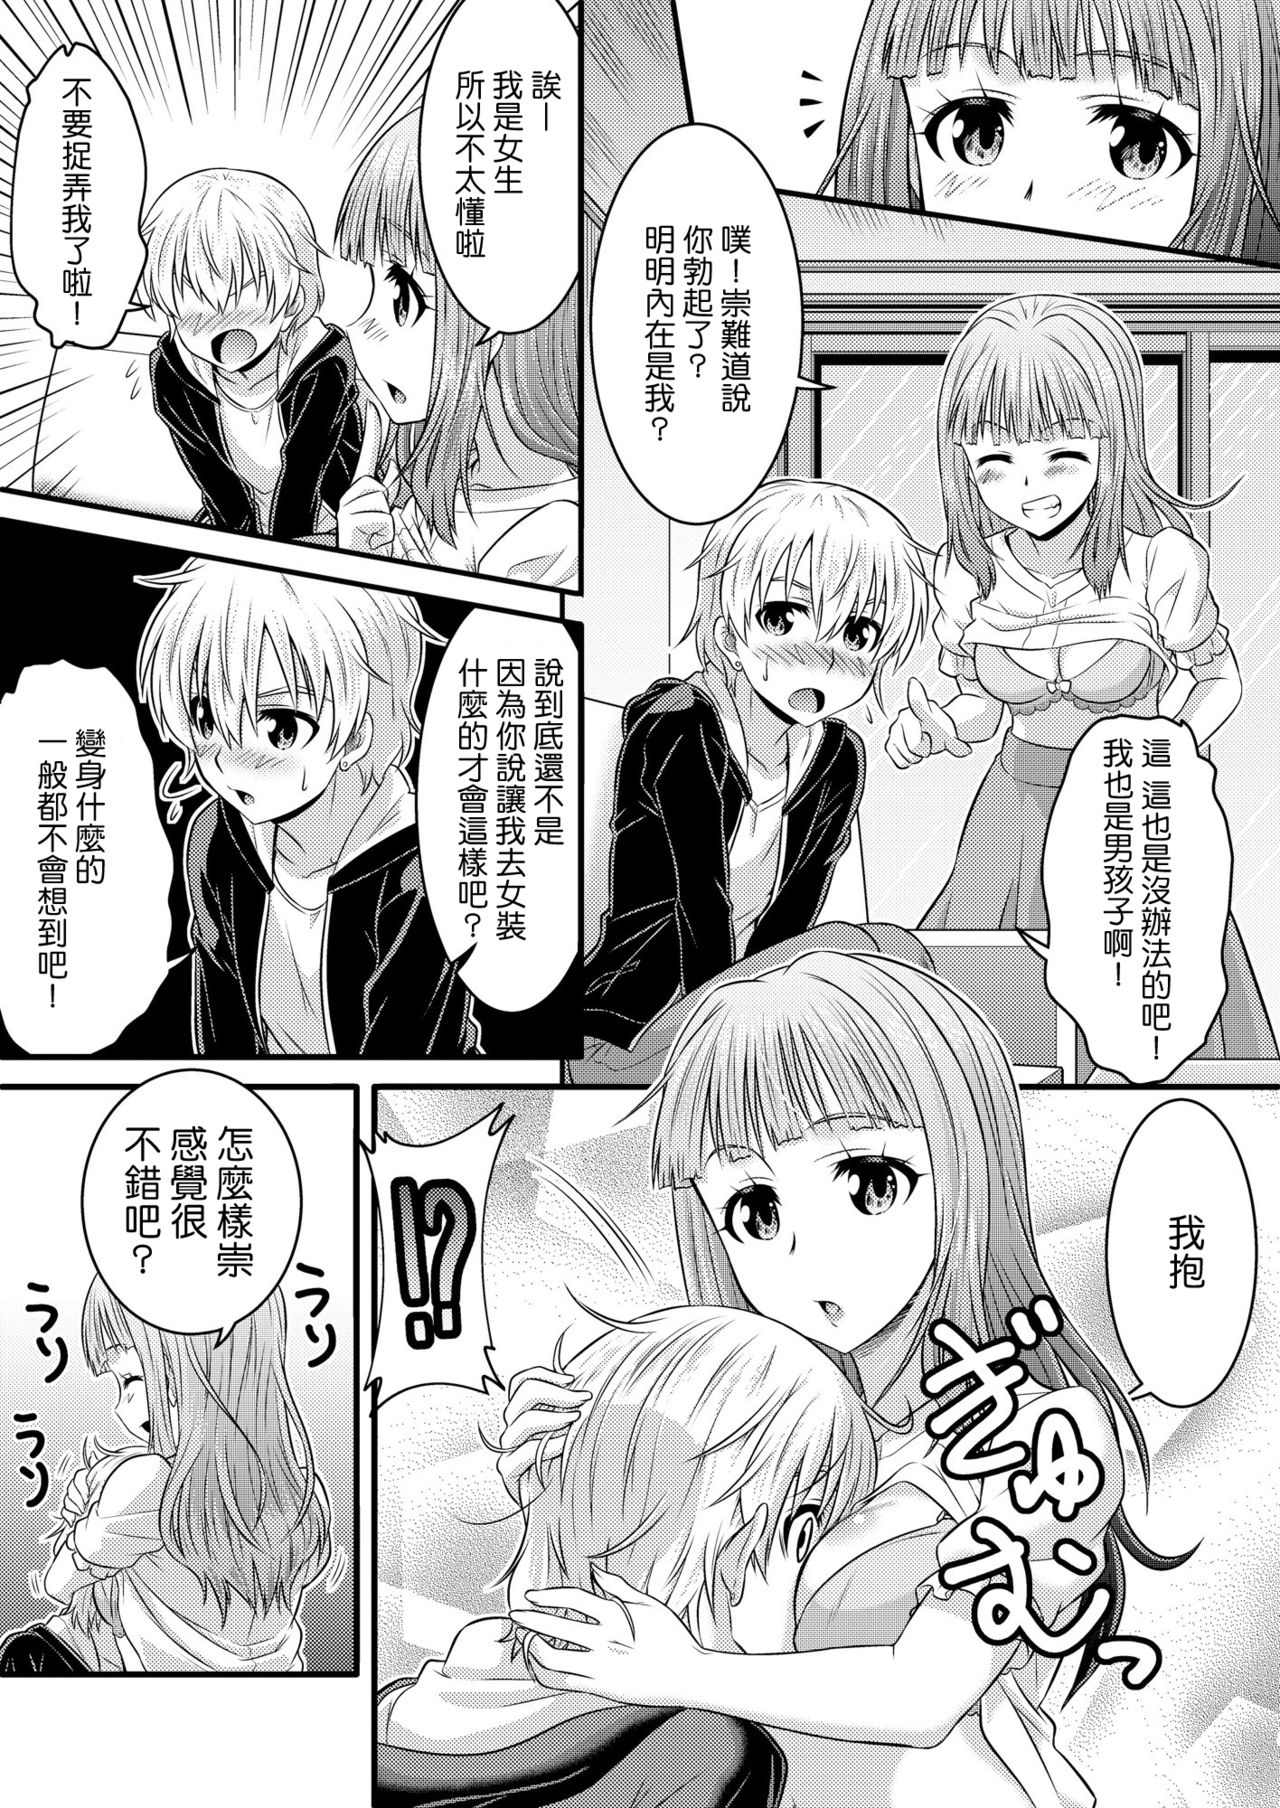 Metamorph ★ Coordination - I Become Whatever Girl I Crossdress As~ [Sister Arc, Classmate Arc] [Chinese] [瑞树汉化组] page 14 full